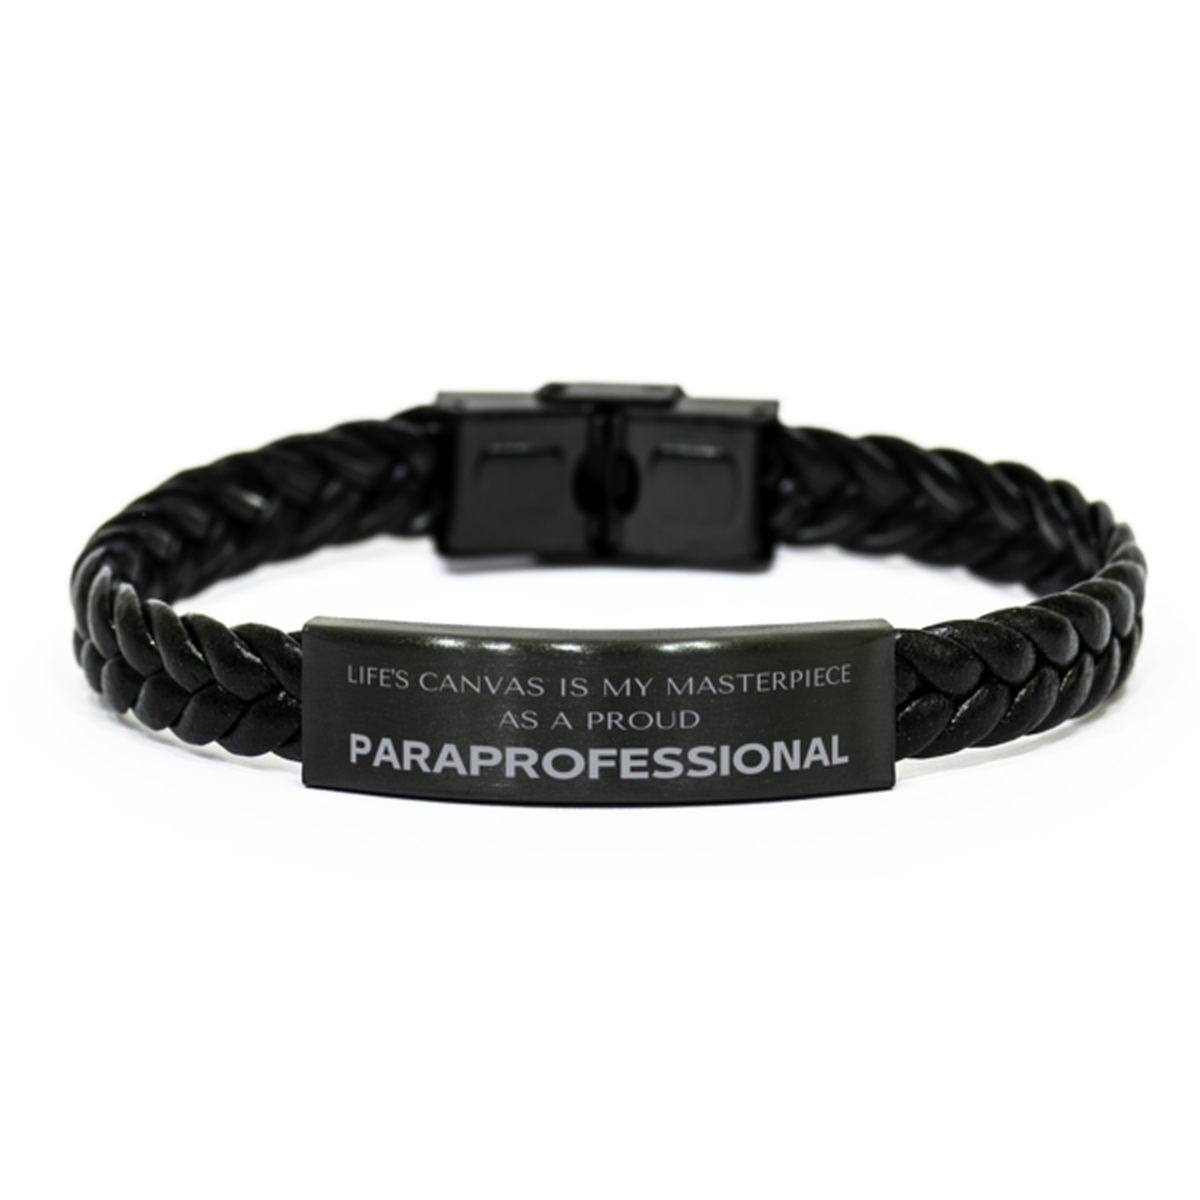 Proud Paraprofessional Gifts, Life's canvas is my masterpiece, Epic Birthday Christmas Unique Braided Leather Bracelet For Paraprofessional, Coworkers, Men, Women, Friends